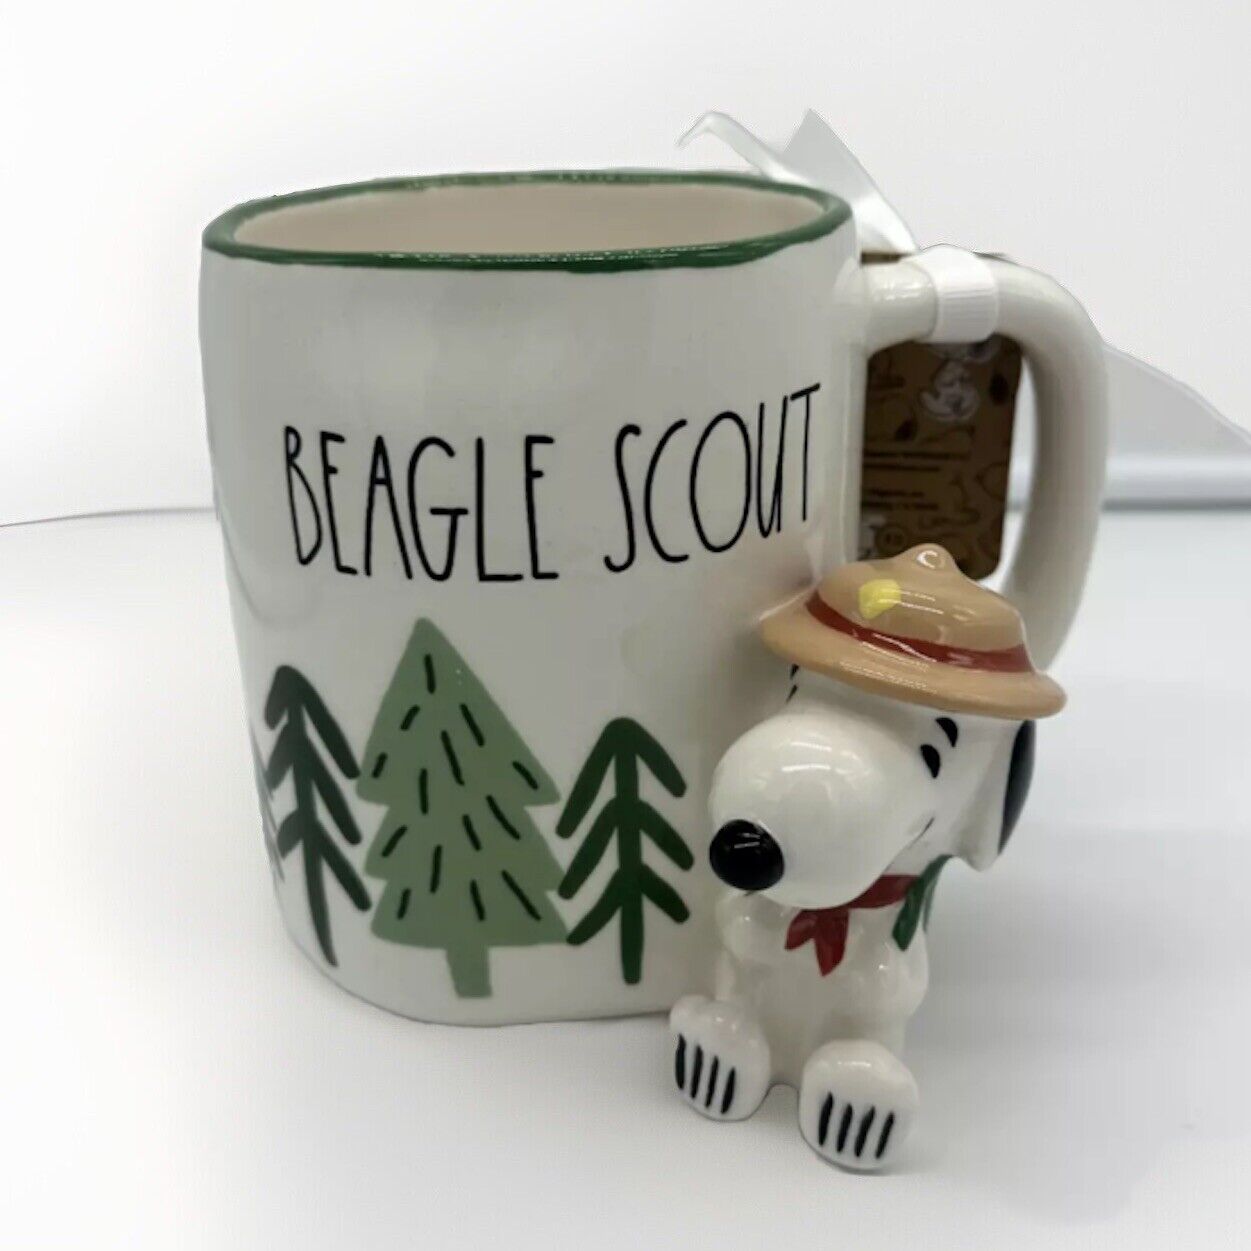 NEW Snoopy Beagle Scout 50th Ann.Double Sided Rae Dunn 20 oz. Mug HAPPY CAMPER